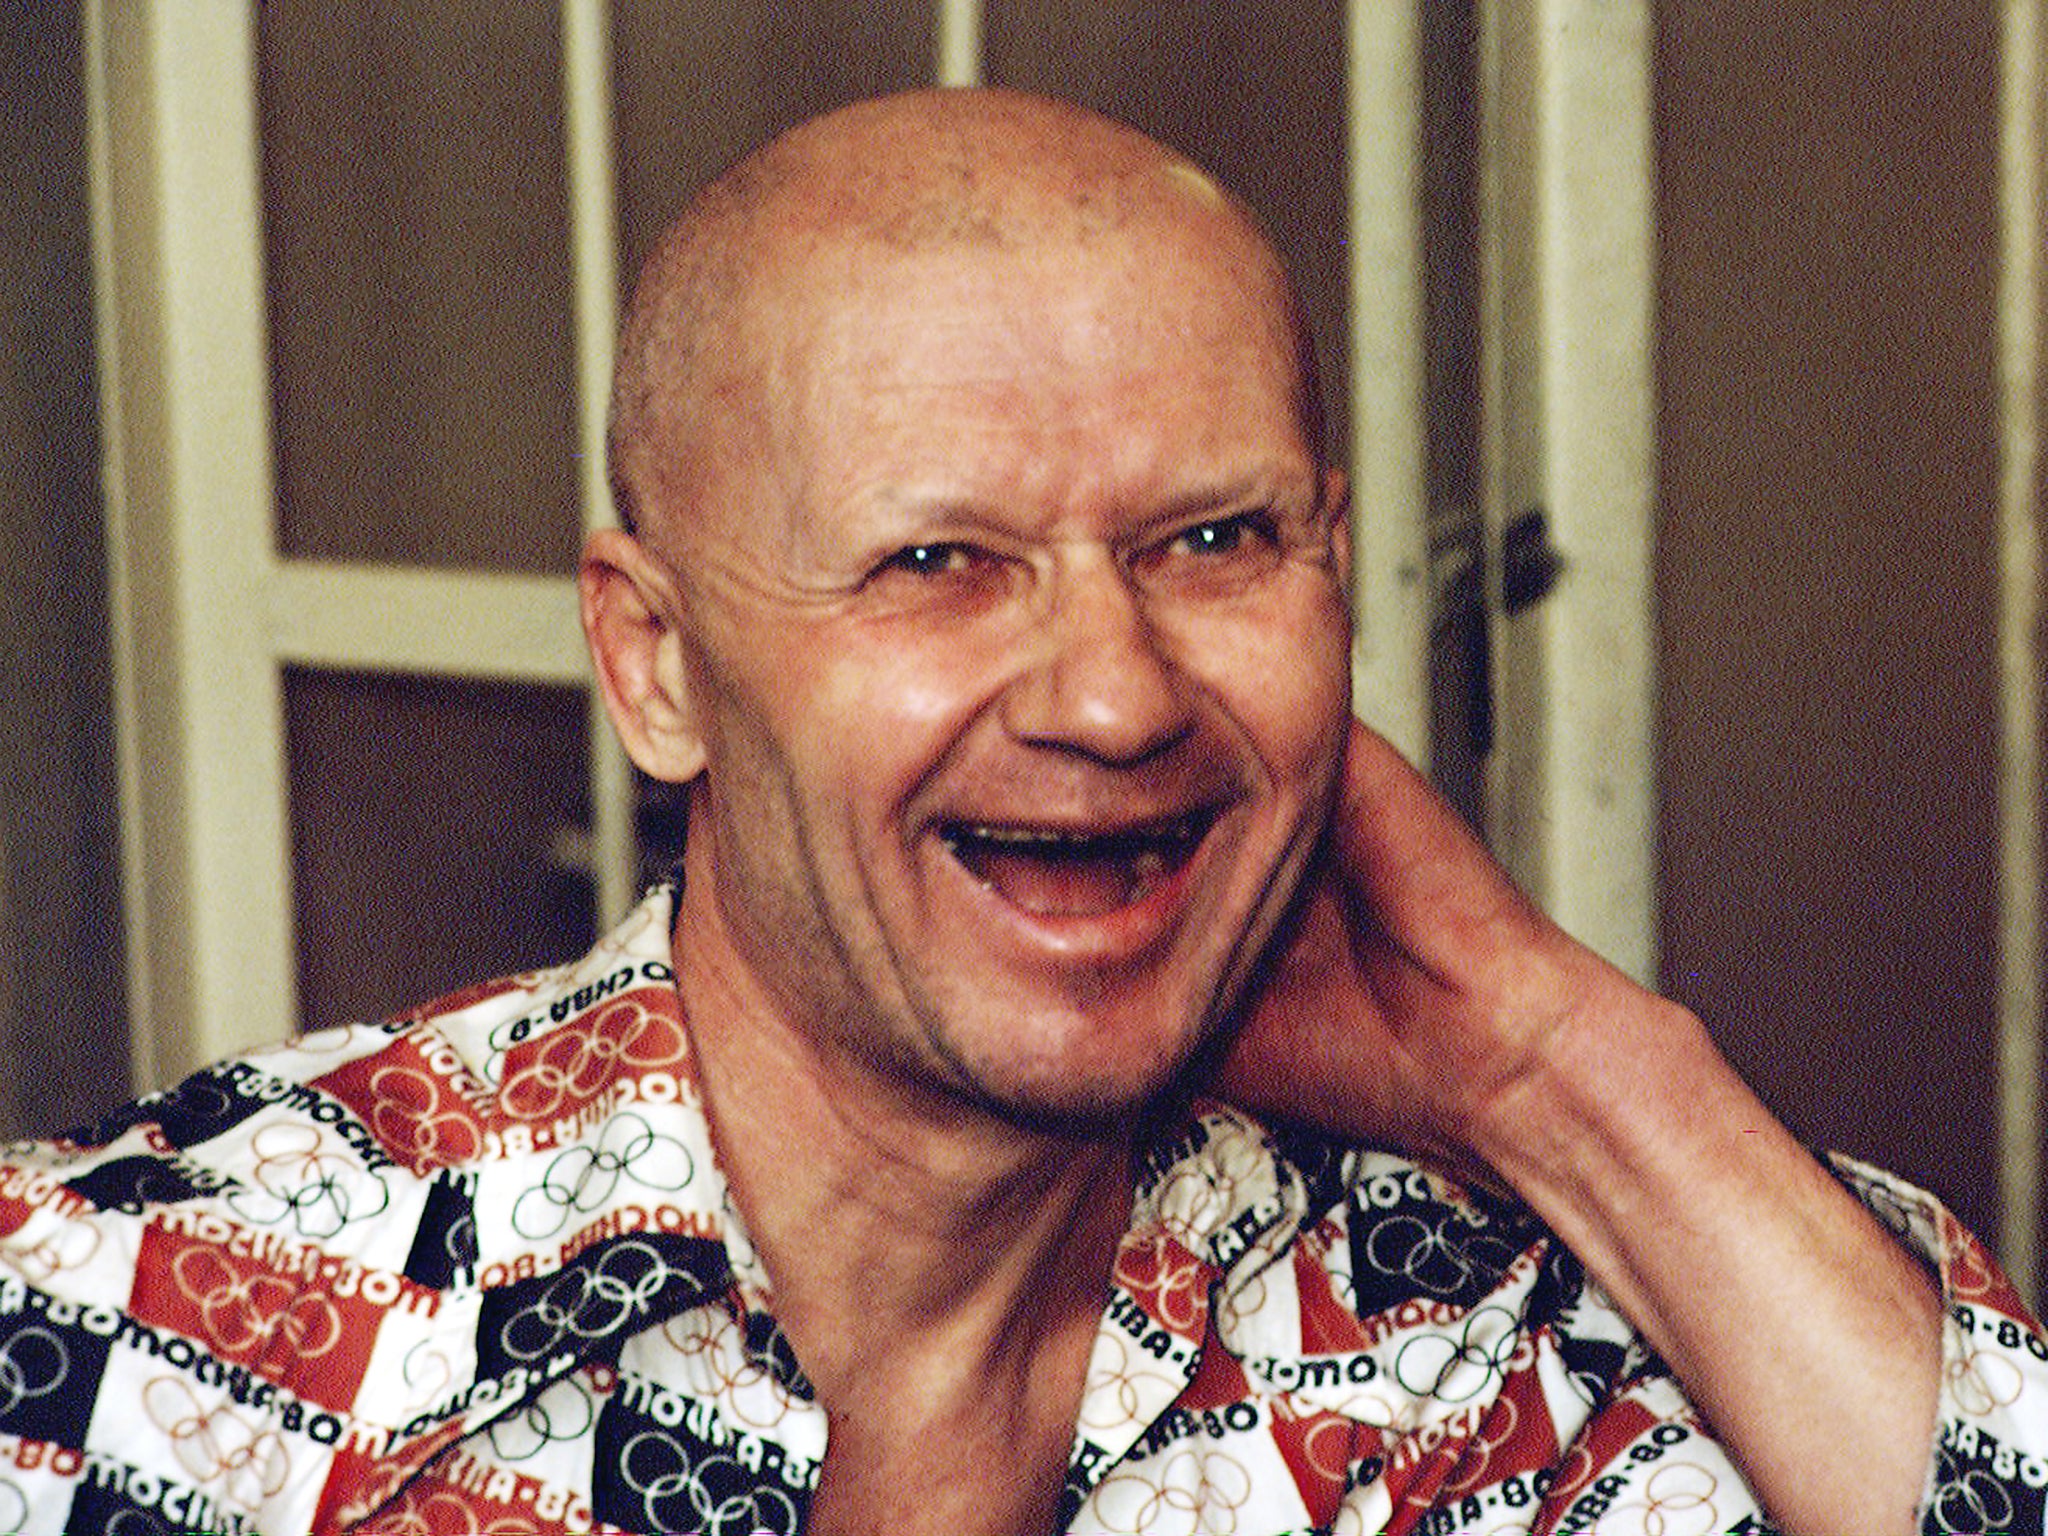 &#13;
Popkov may have killed more victims than Andrei Chikatilo, the Butcher of Rostov... &#13;